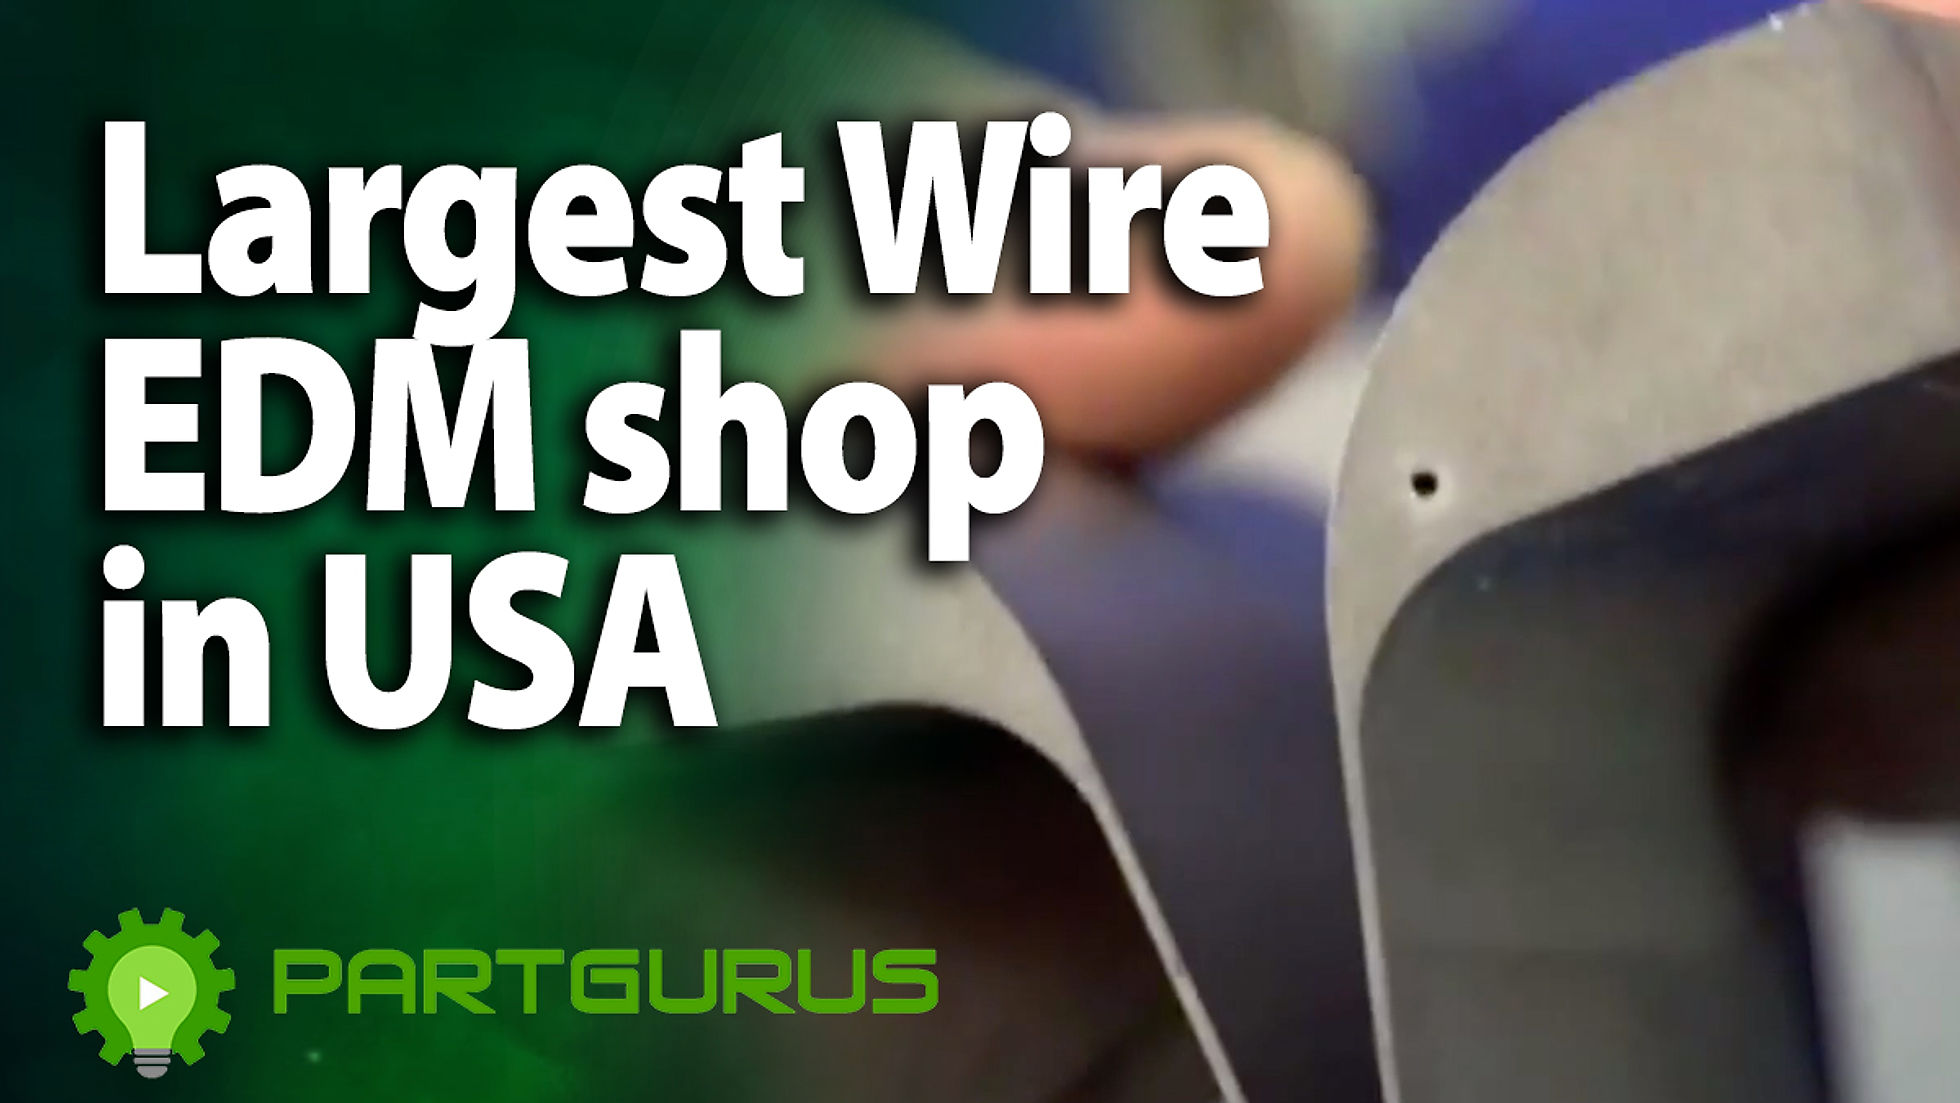 Largest wire EDM shop in USA